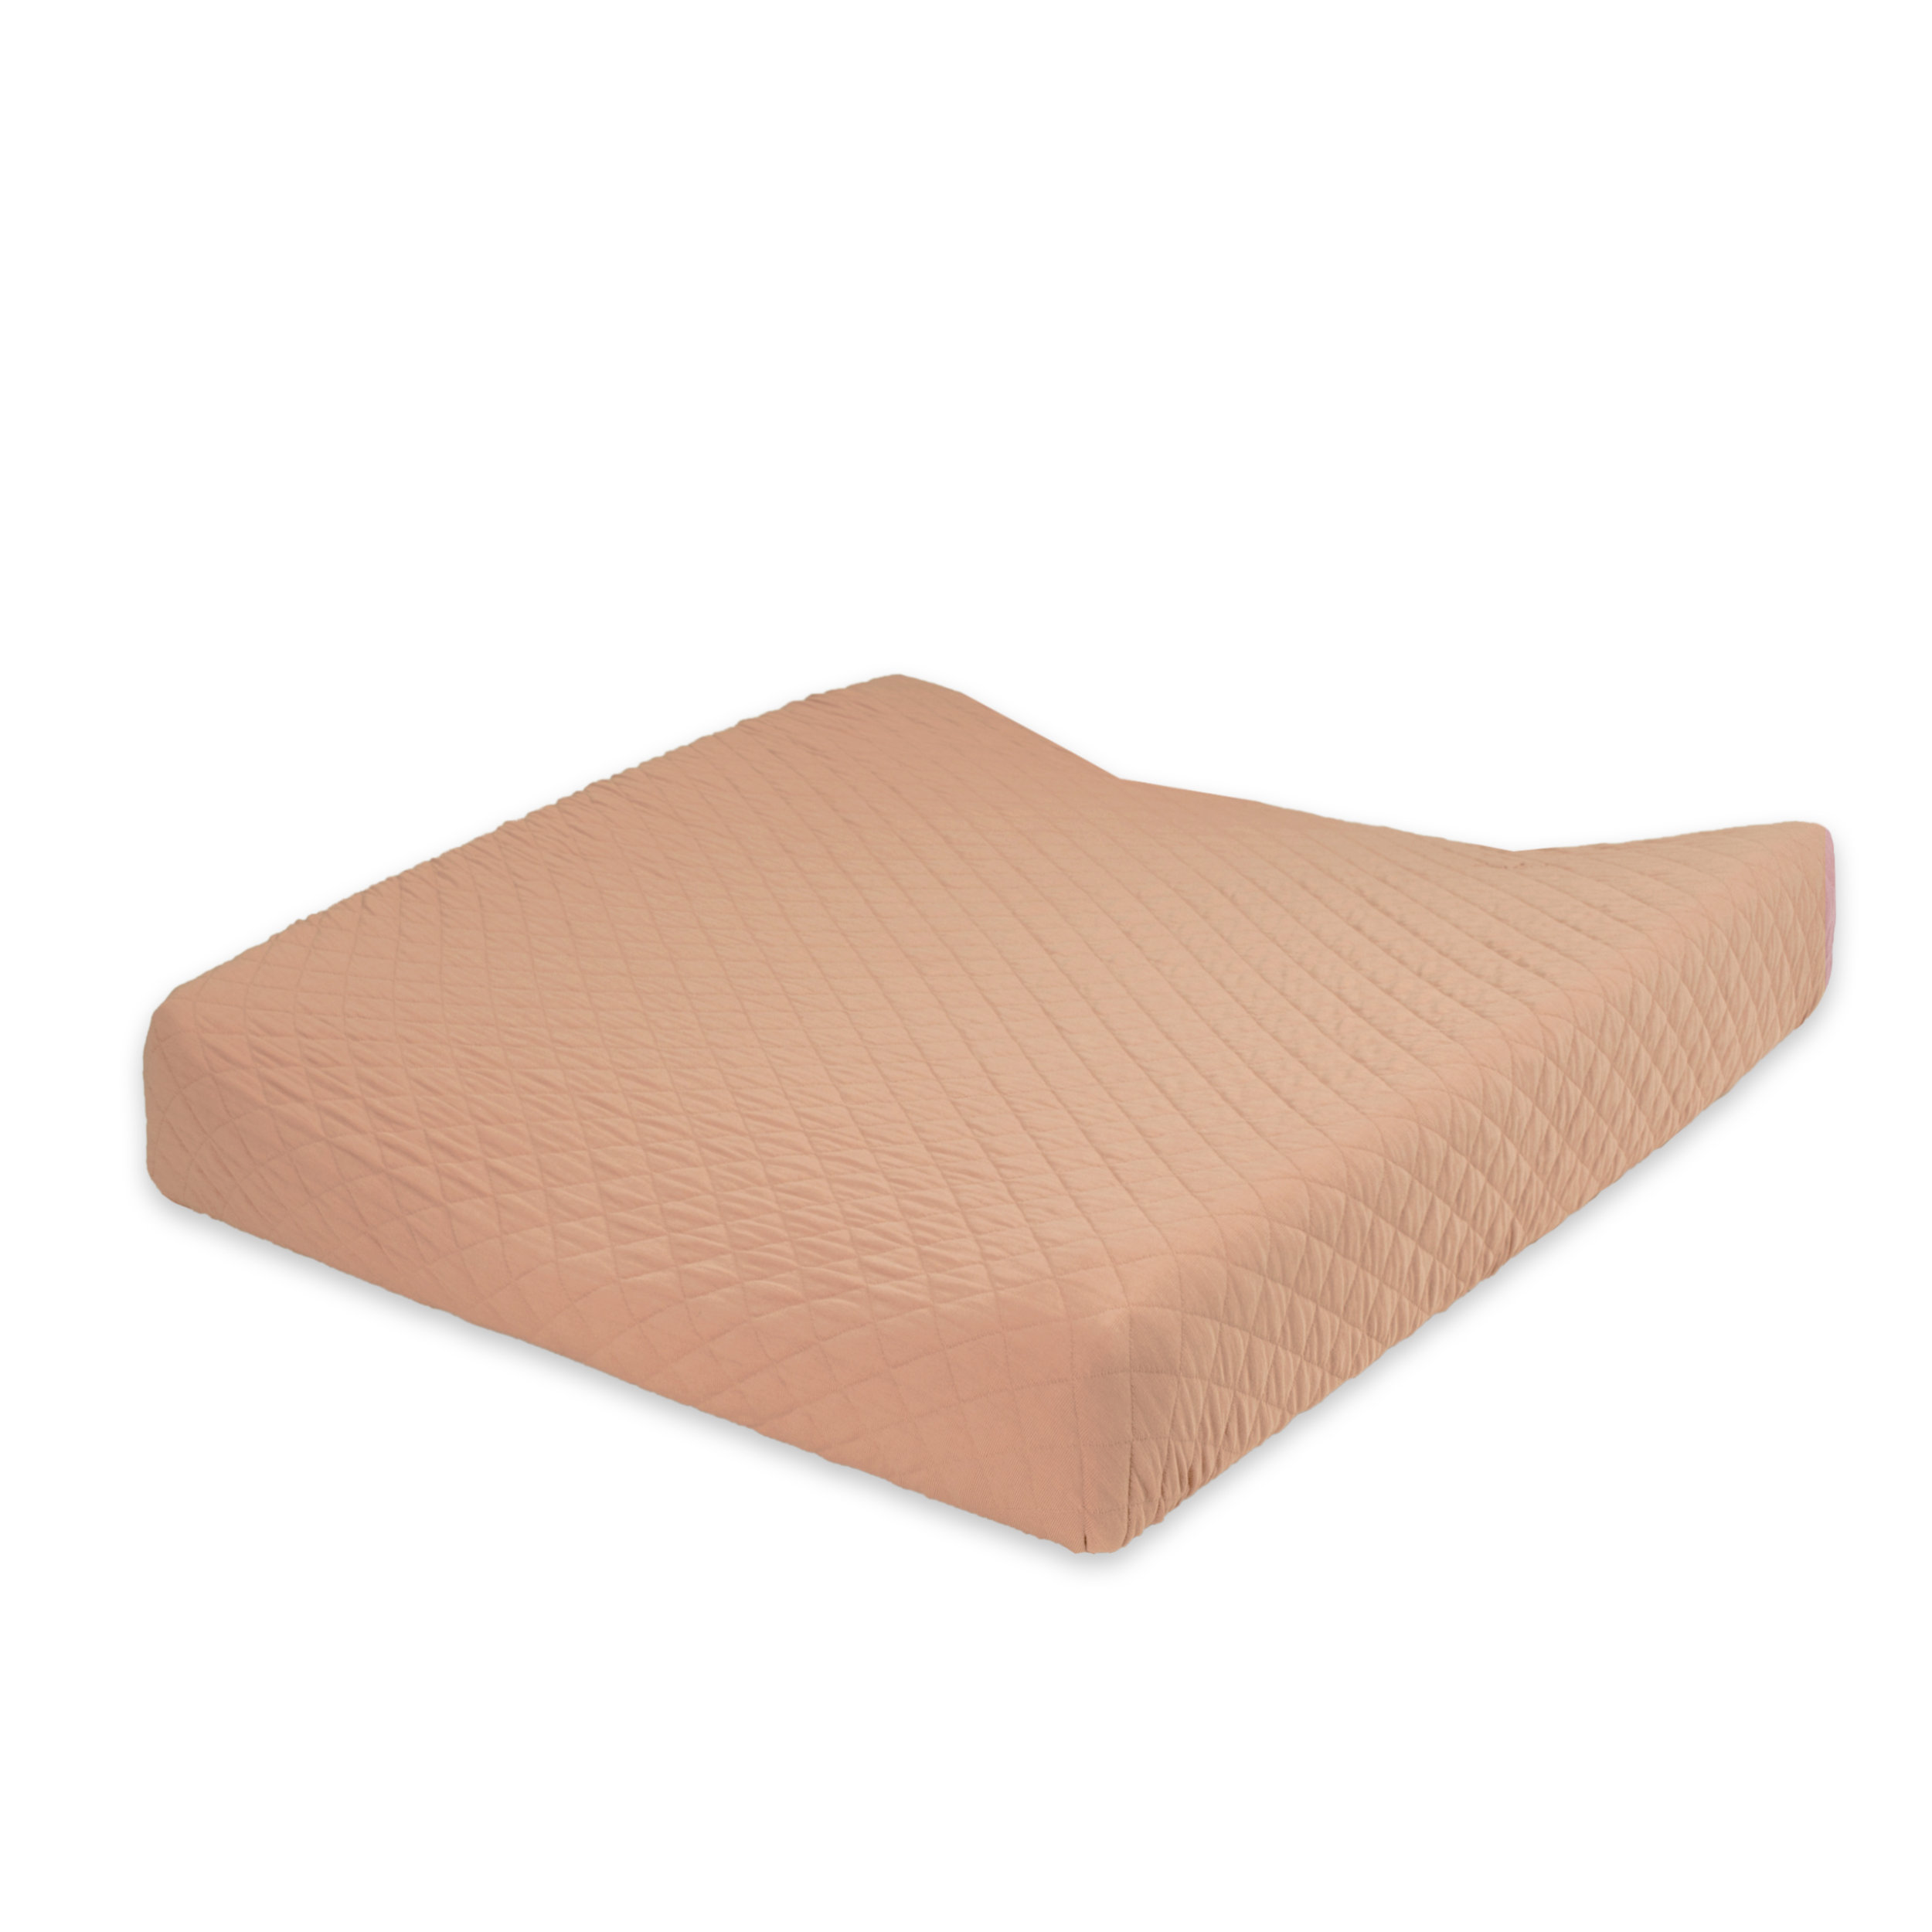 Funda protector cambiador Pady quilted jersey 50x75cm QUILT Beige